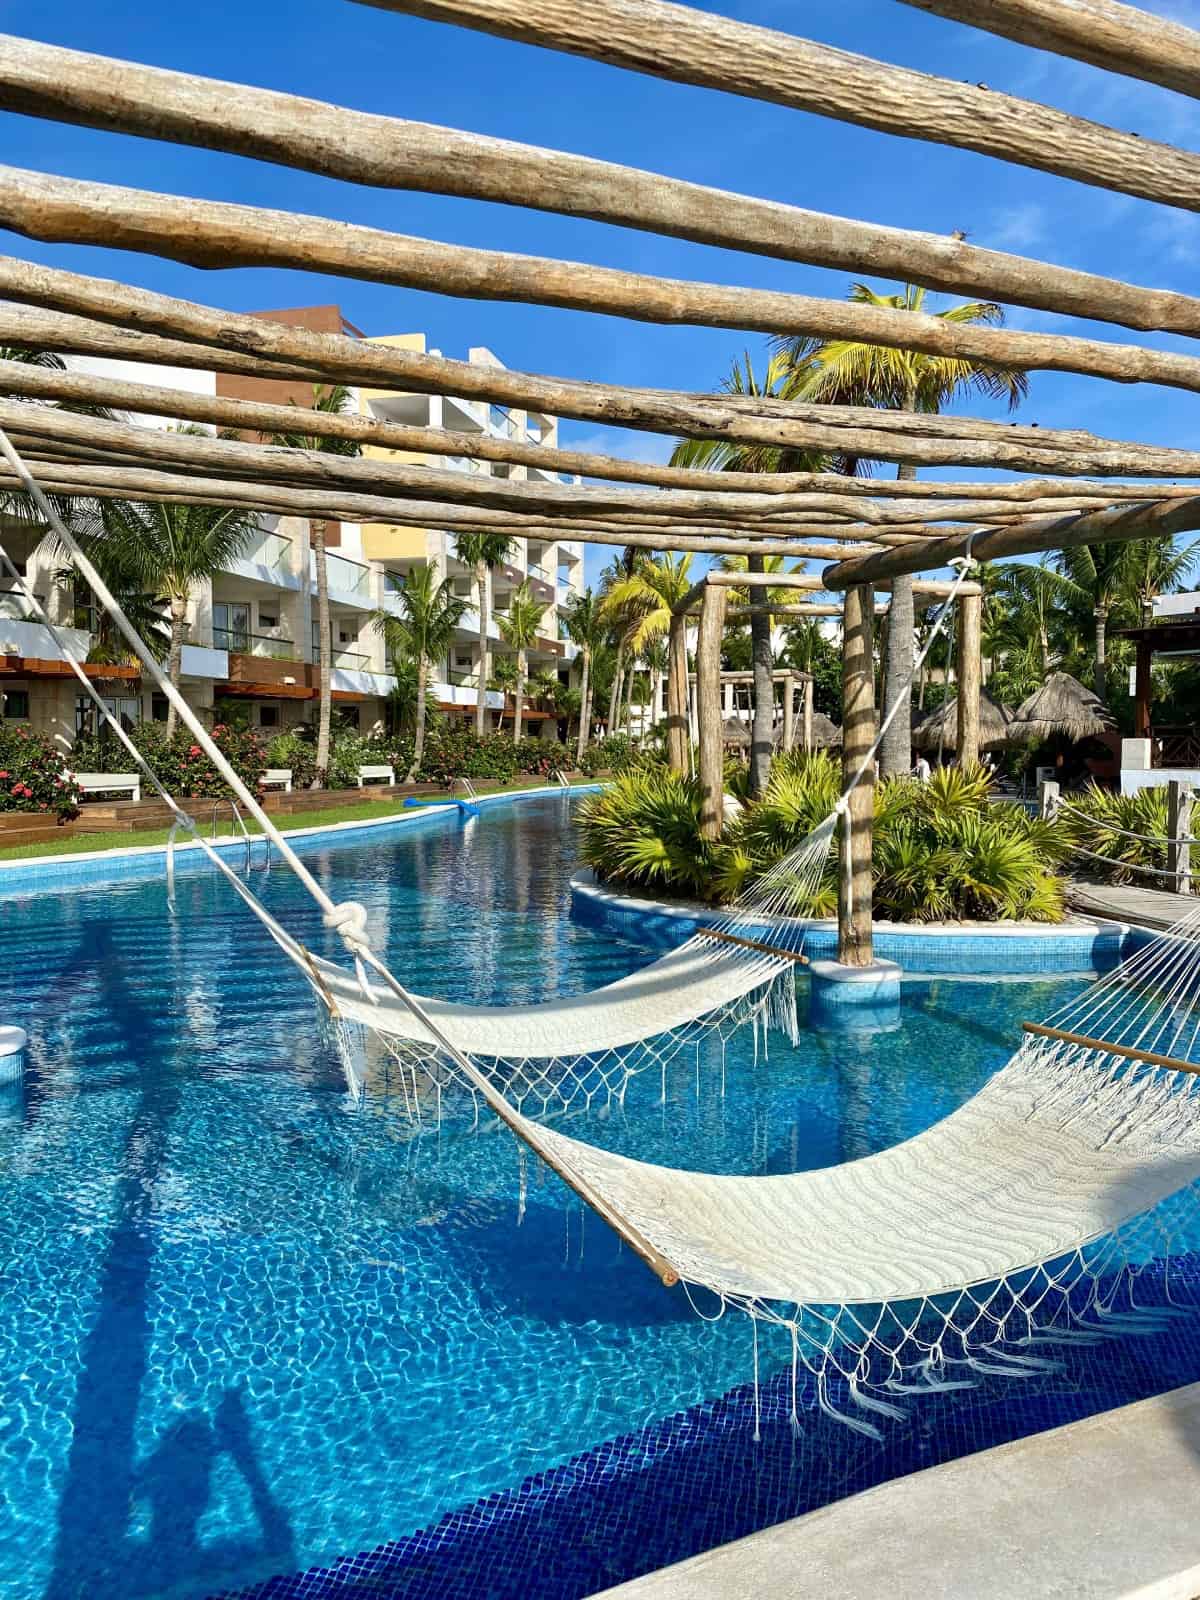 Best luxury all-inclusive resorts in Mexico, Caribbean, Costa Rica - Excellence Playa Mujeres (EPM) is a great adults-only option on Riviera Maya